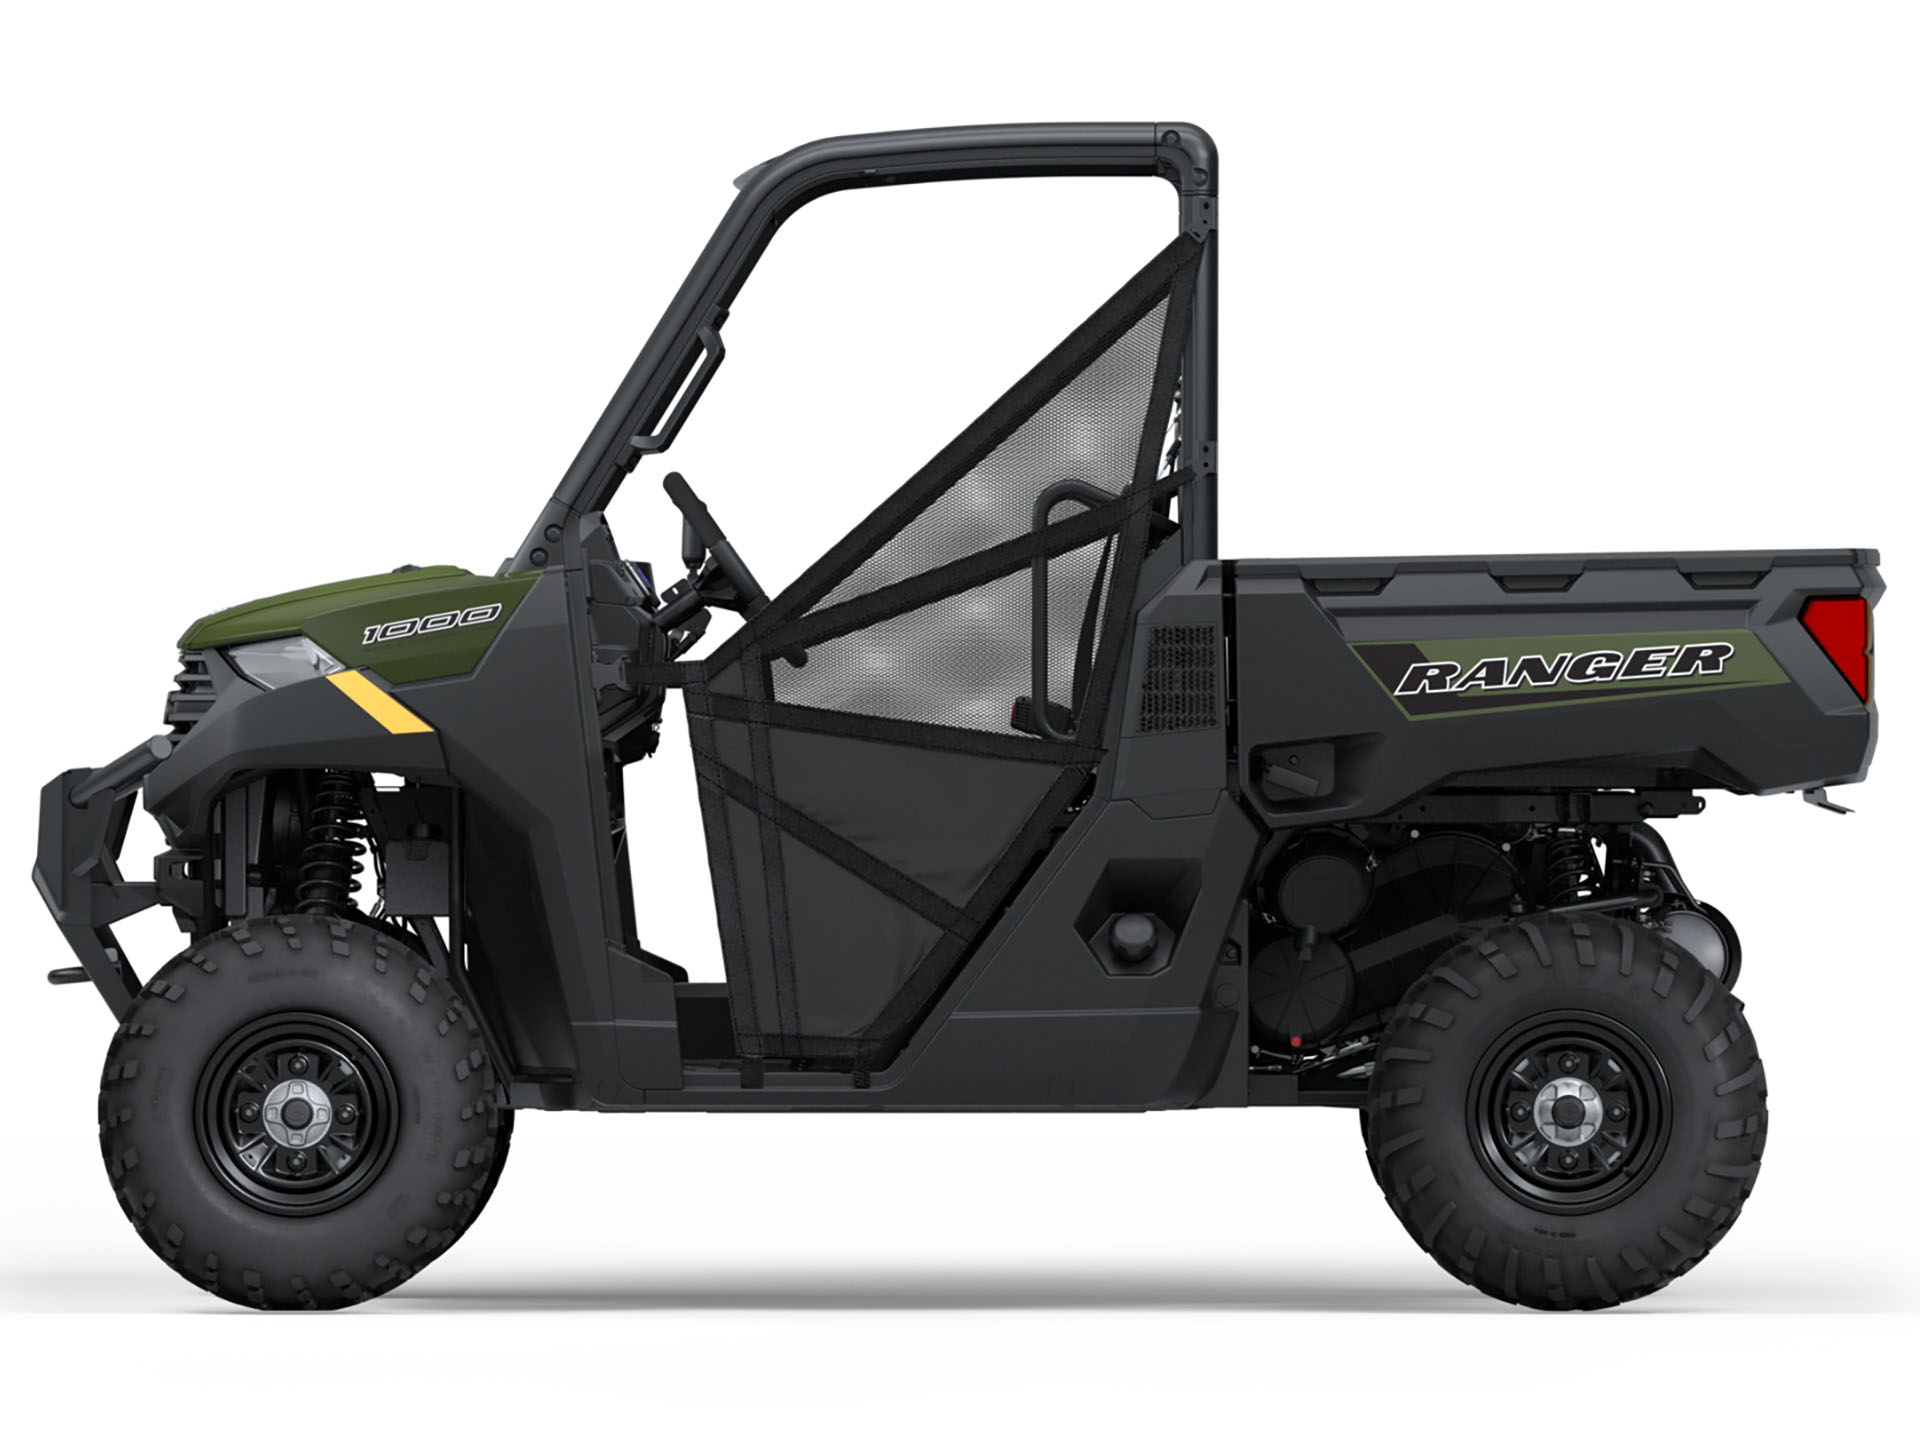 2025 Polaris Ranger 1000 EPS in Knoxville, Tennessee - Photo 2